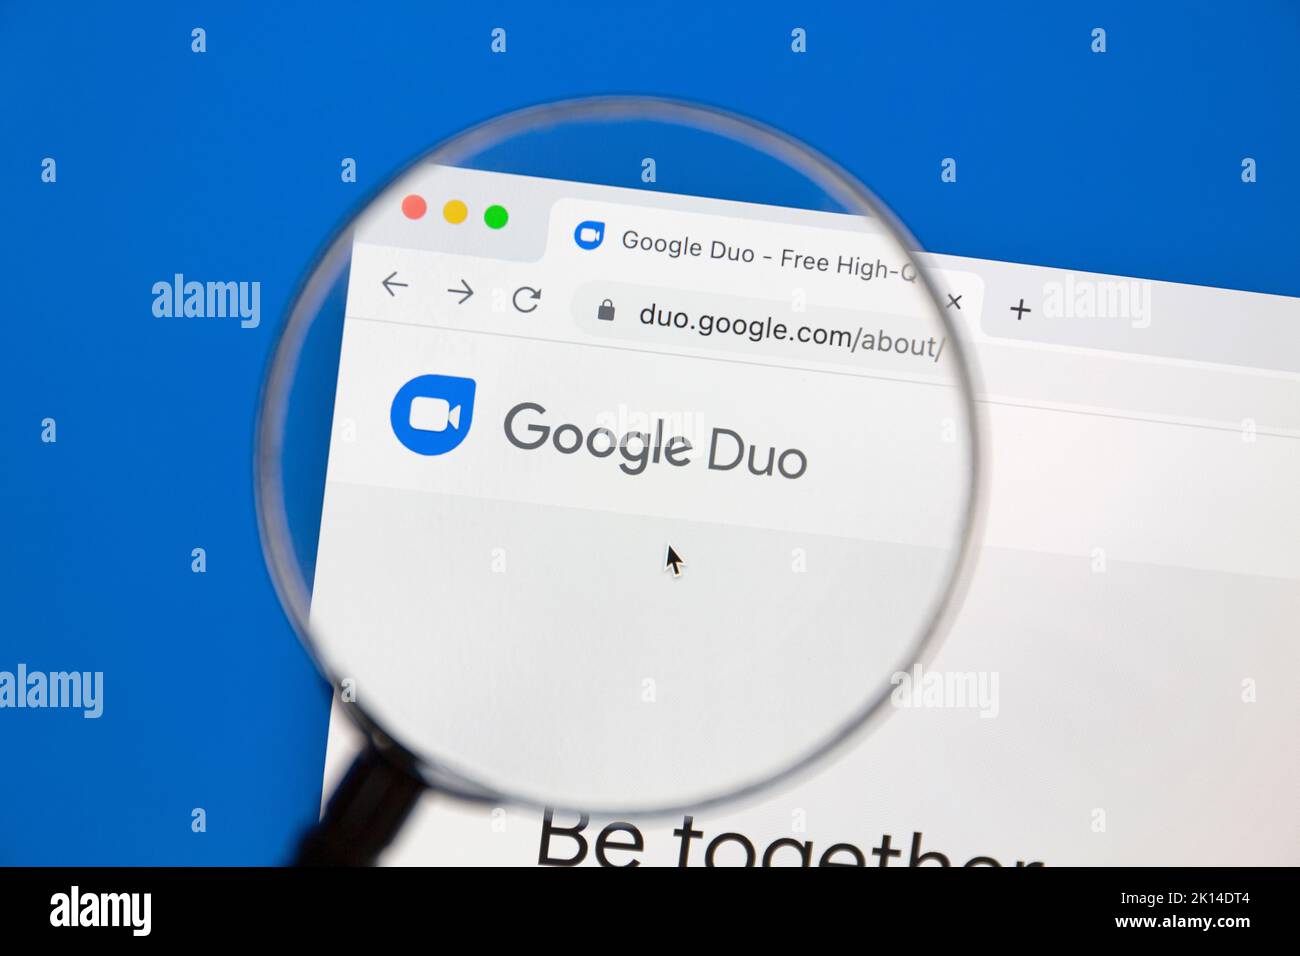 Ostersund, Sweden - June 29, 2022: Google Duo website. Google Duo is a video chat mobile app developed by Google. Stock Photo